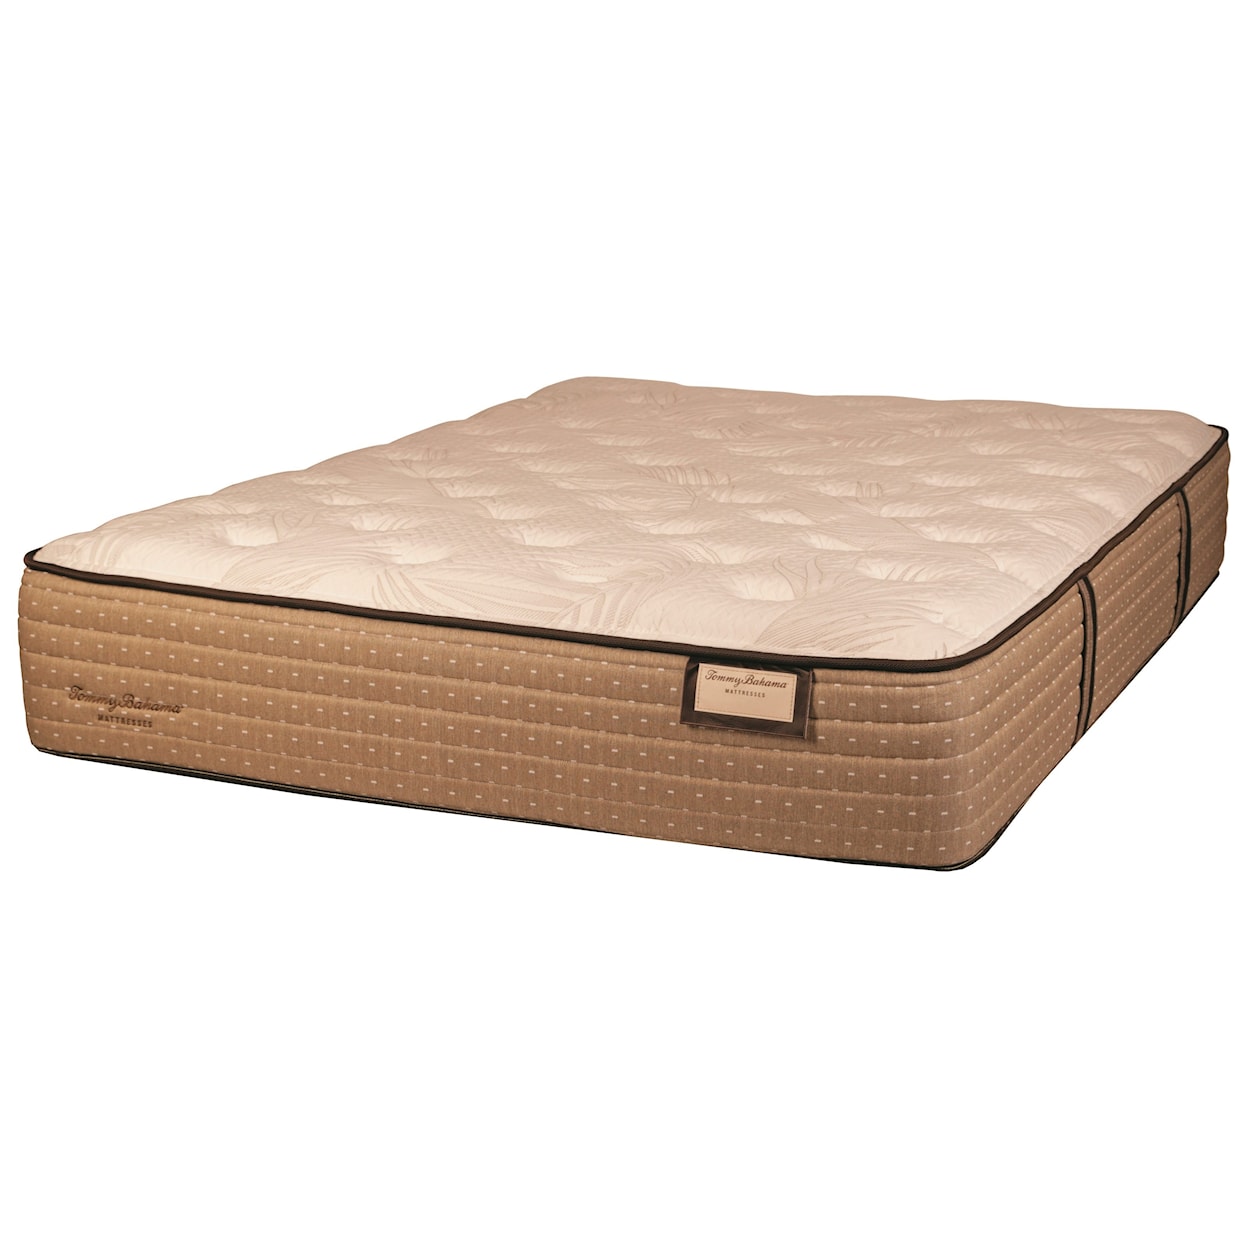 Therapedic Tommy Bahama Shake the Sand Firm 6034 Twin Firm Luxury Mattress